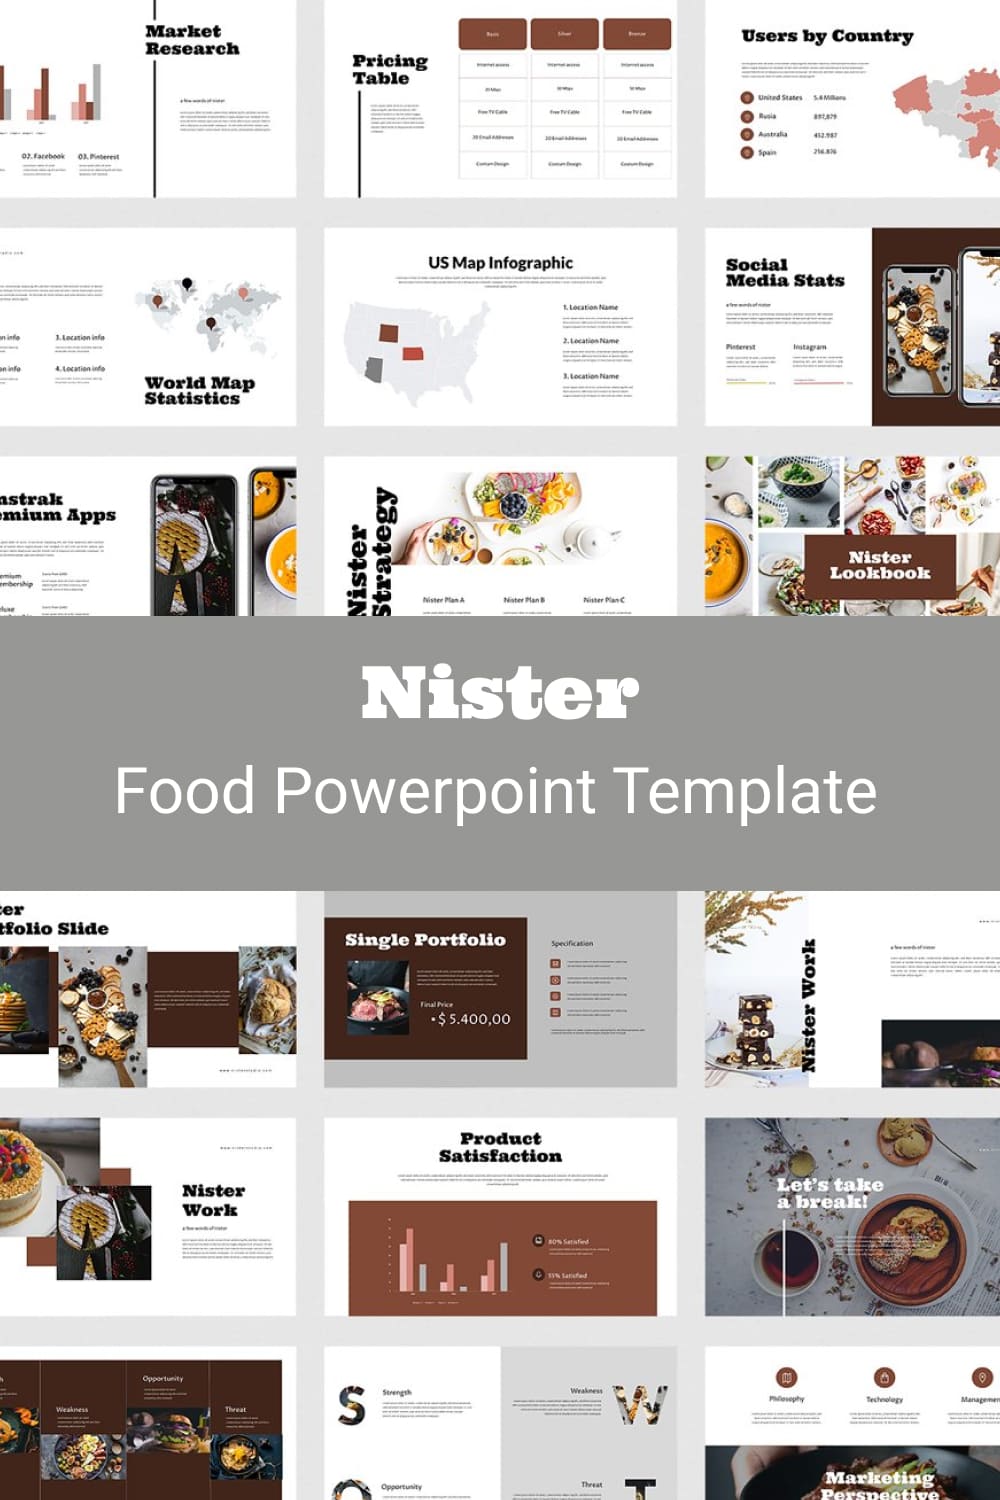 nister food powerpoint template 01 1000x1500